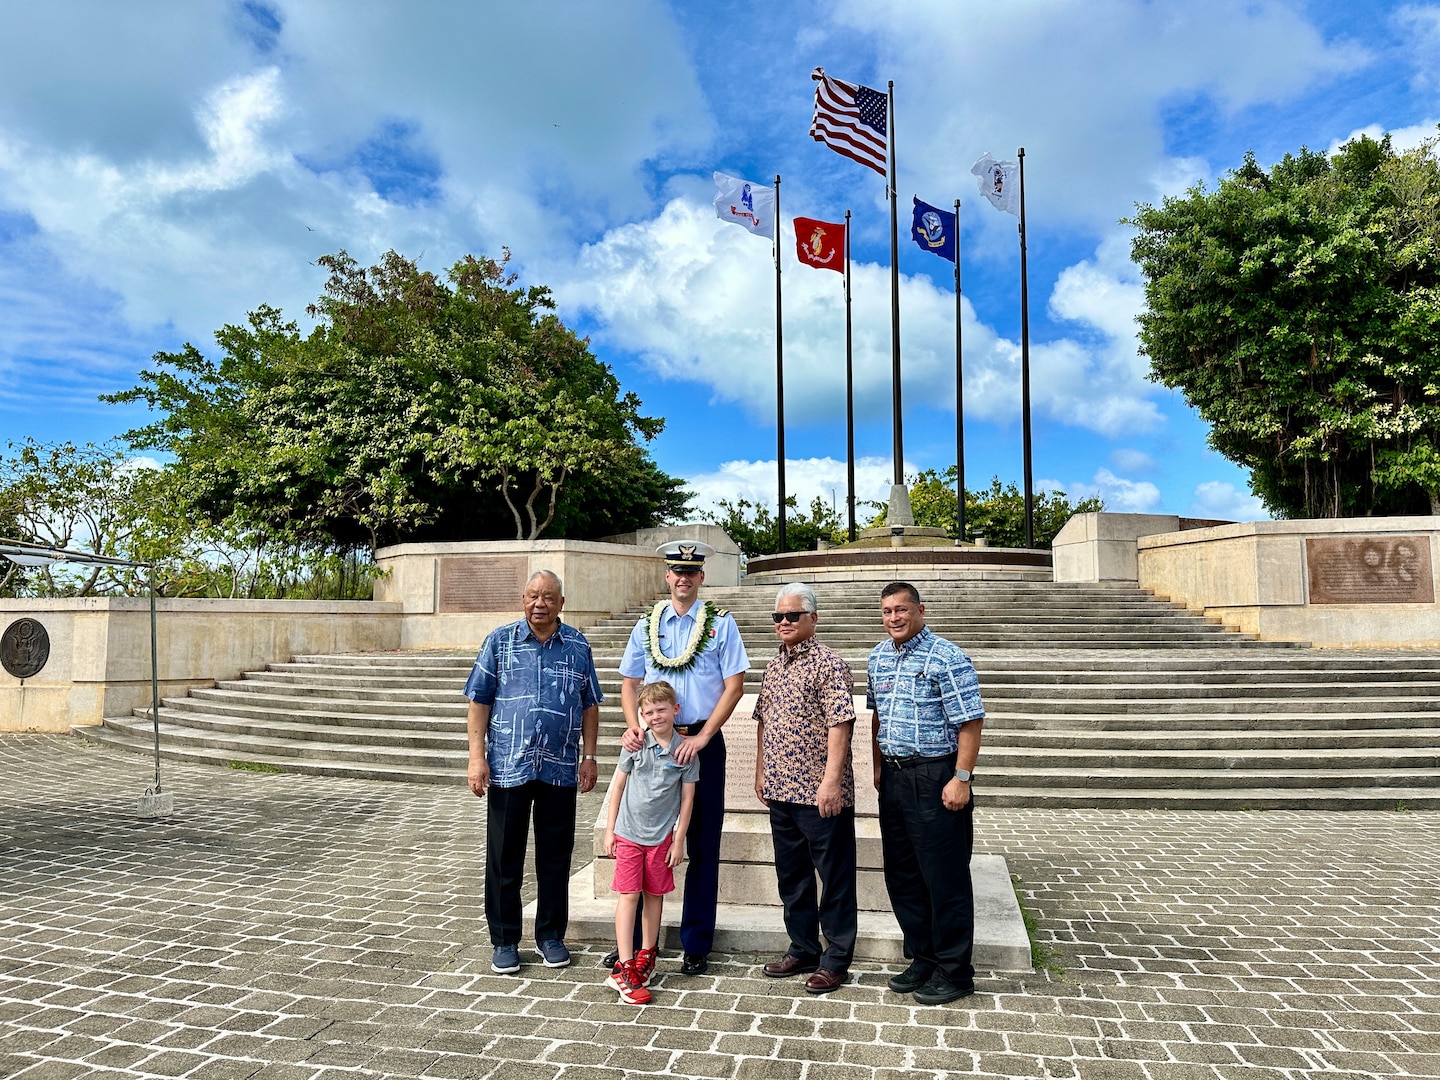 Lt. Justin Miller, commanding officer of Marine Safety Unit Saipan, and his son stand for a photo with CNMI Gov. Arnold Palacios, Lt. Gov. David Apatang, and Harry Blanco, OIA Representative to the CNMI, at a ceremony to formally establish MSU Saipan in Garapan at the American Memorial Park on April 5, 2024. This significant achievement marks a milestone in leadership evolution and responsibility expansion within the U.S. Coast Guard, reflecting steadfast commitment to serving the people of Saipan and the Commonwealth of the Northern Marianas Islands (CNMI) with unparalleled dedication and excellence. The change is part of an initiative to provide junior officers with increased command opportunities, fostering professional growth and leadership development within the ranks. Eighteen marine safety detachments are converting to marine safety units. (U.S. Coast Guard photo by Chief Warrant Officer Sara Muir)